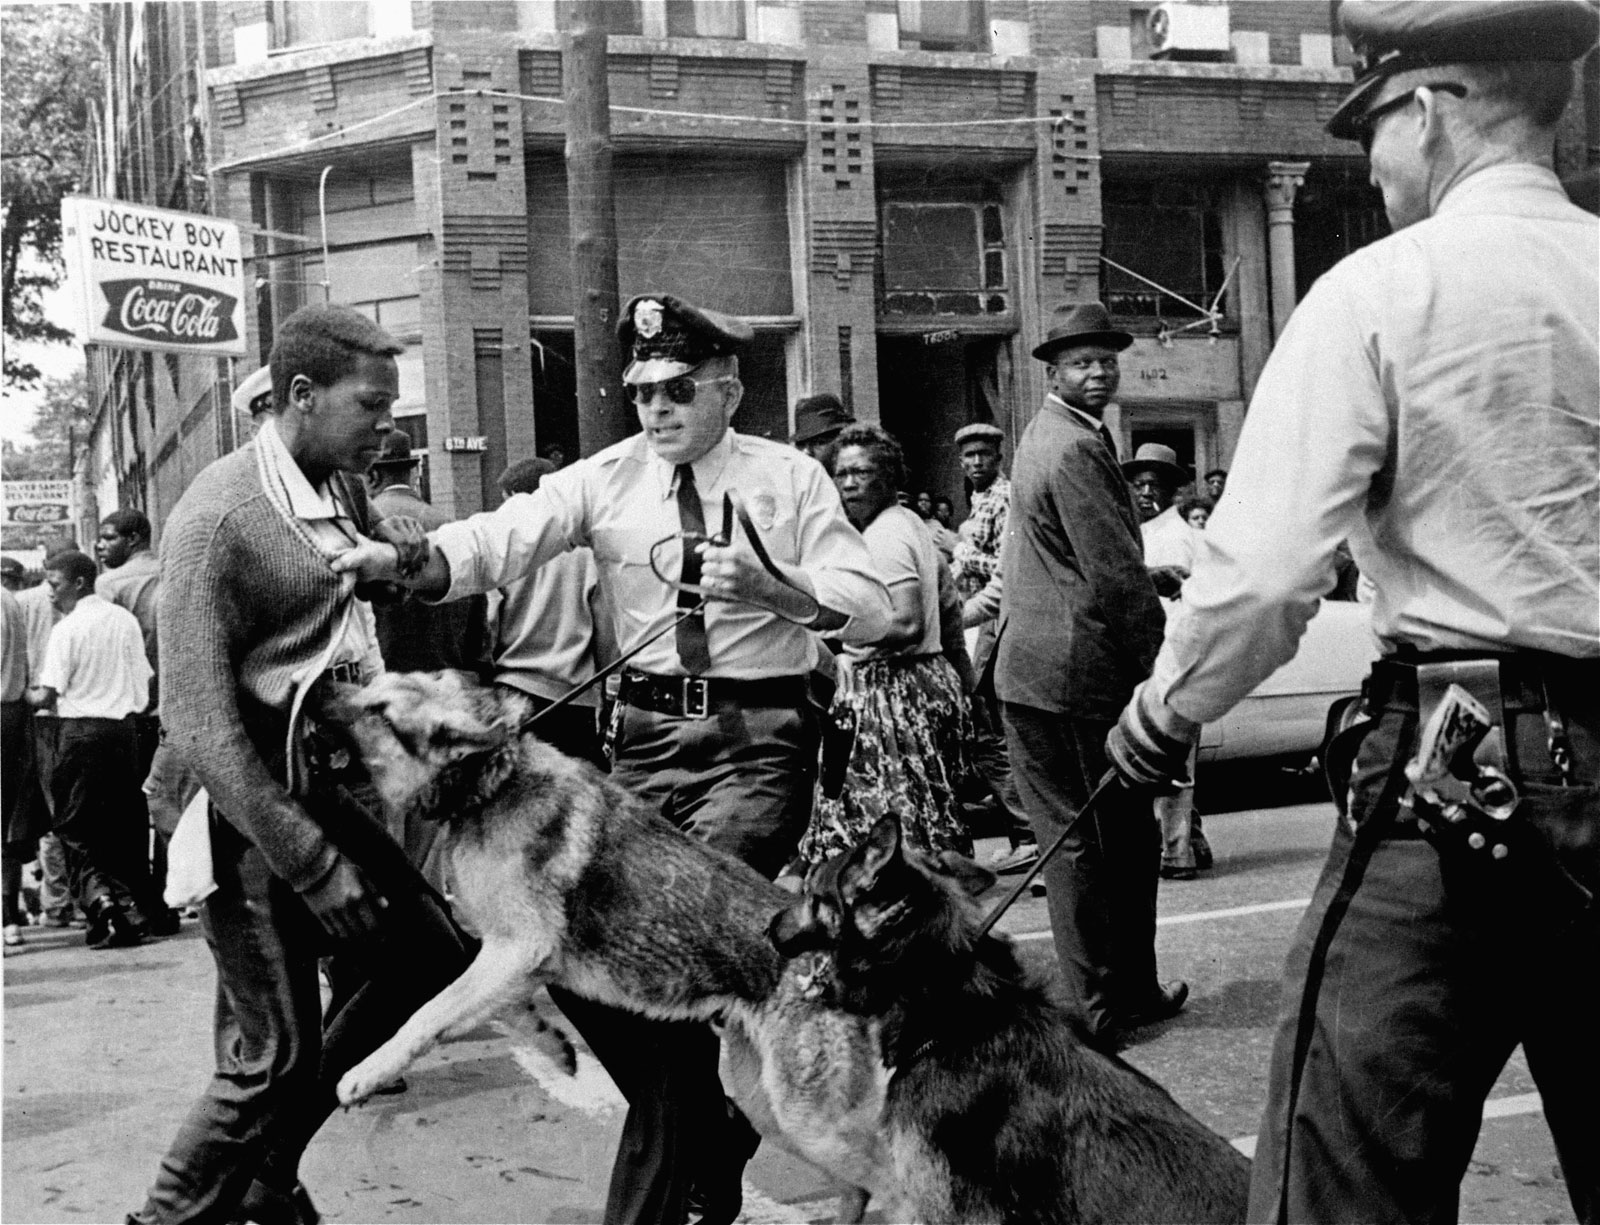 What we now know about police brutality (and how to end it)